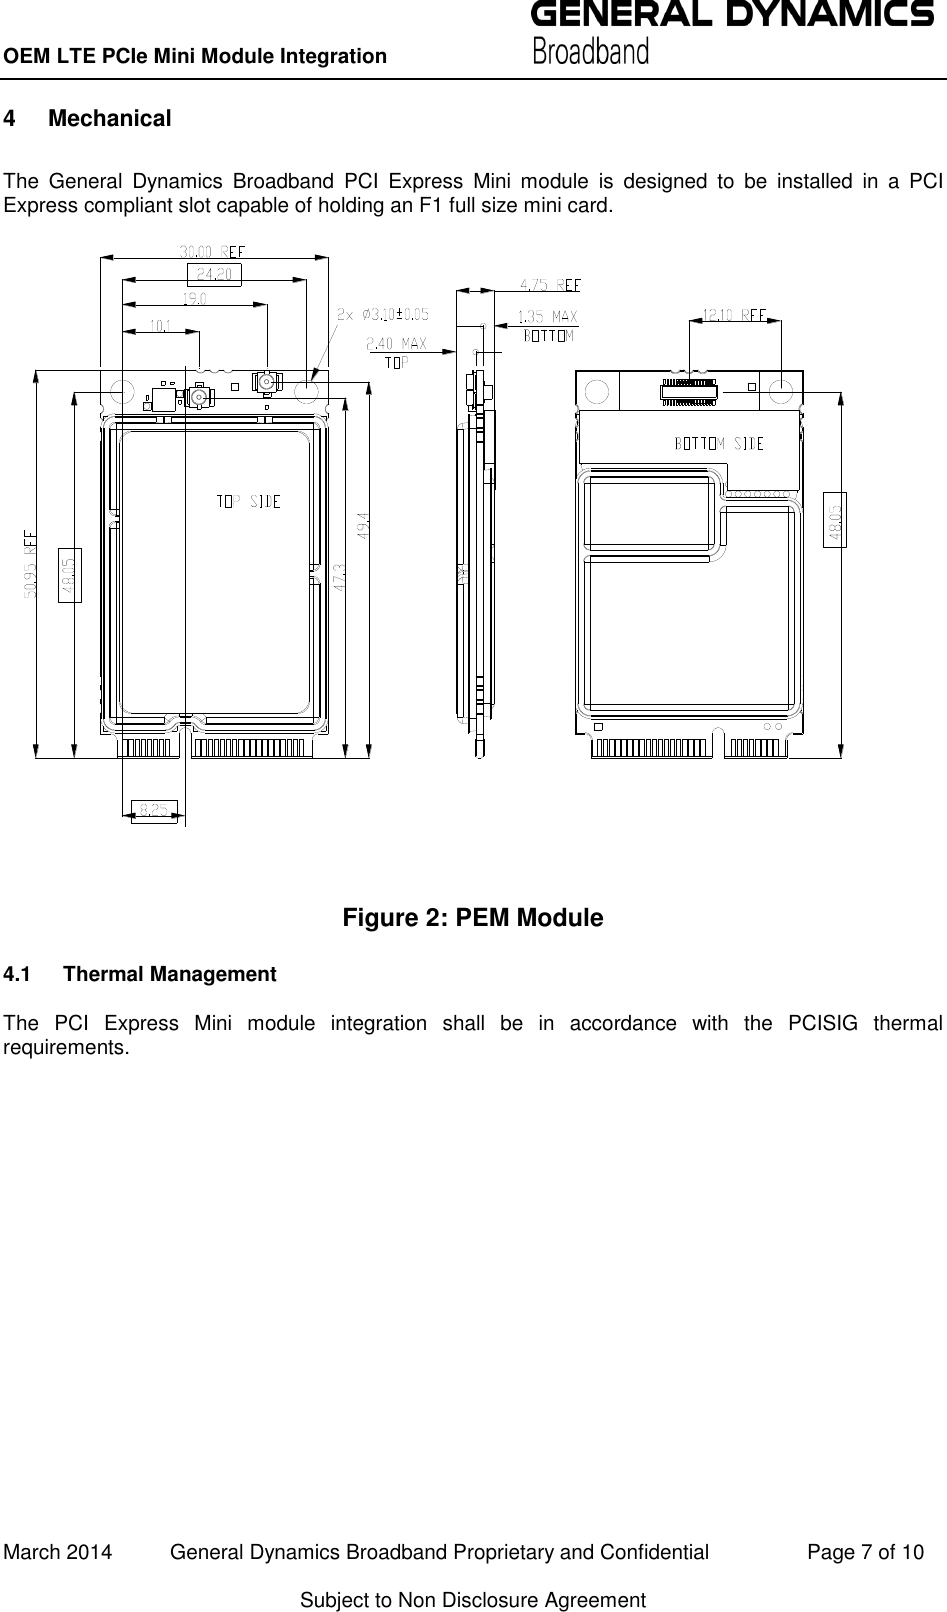 OEM LTE PCIe Mini Module Integration          March 2014          General Dynamics Broadband Proprietary and Confidential                 Page 7 of 10 Subject to Non Disclosure Agreement 4  Mechanical The  General  Dynamics  Broadband  PCI  Express  Mini  module  is  designed  to  be  installed  in  a  PCI Express compliant slot capable of holding an F1 full size mini card.  Figure 2: PEM Module 4.1  Thermal Management The  PCI  Express  Mini  module  integration  shall  be  in  accordance  with  the  PCISIG  thermal requirements. 